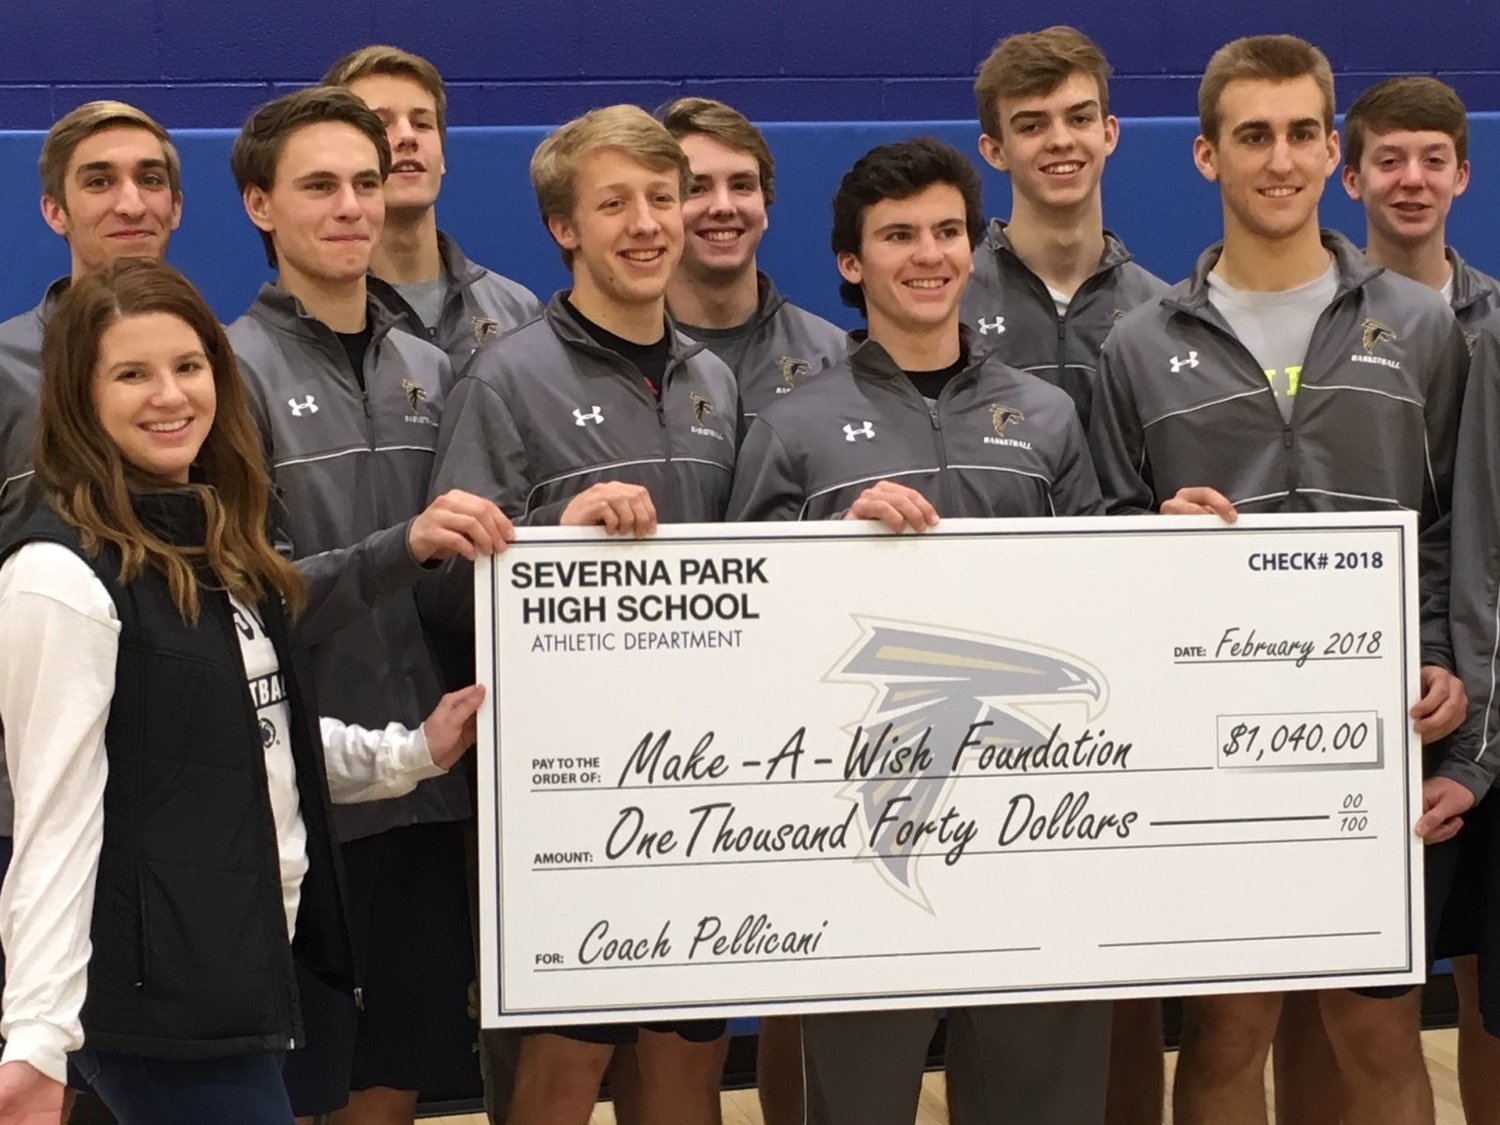 Severna Park High School students raised more than $1,000 for the Make-A-Wish Foundation in 2018 to support Gabi Pellicani.